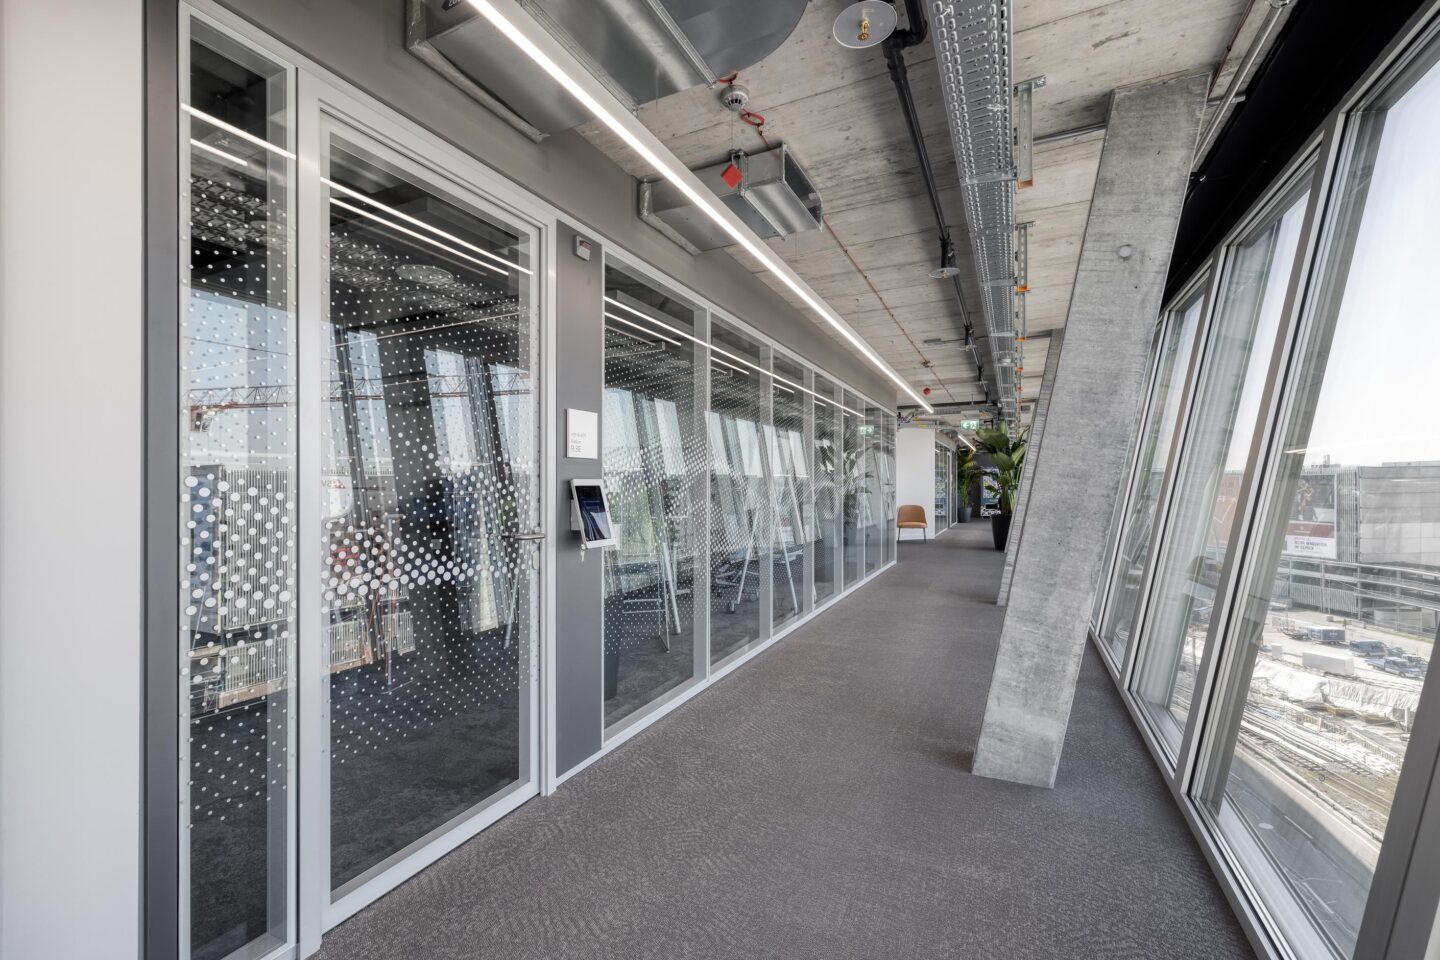 The profiles, frames and aluminium frame doors are powder-coated in RAL 7039 Quartz grey.